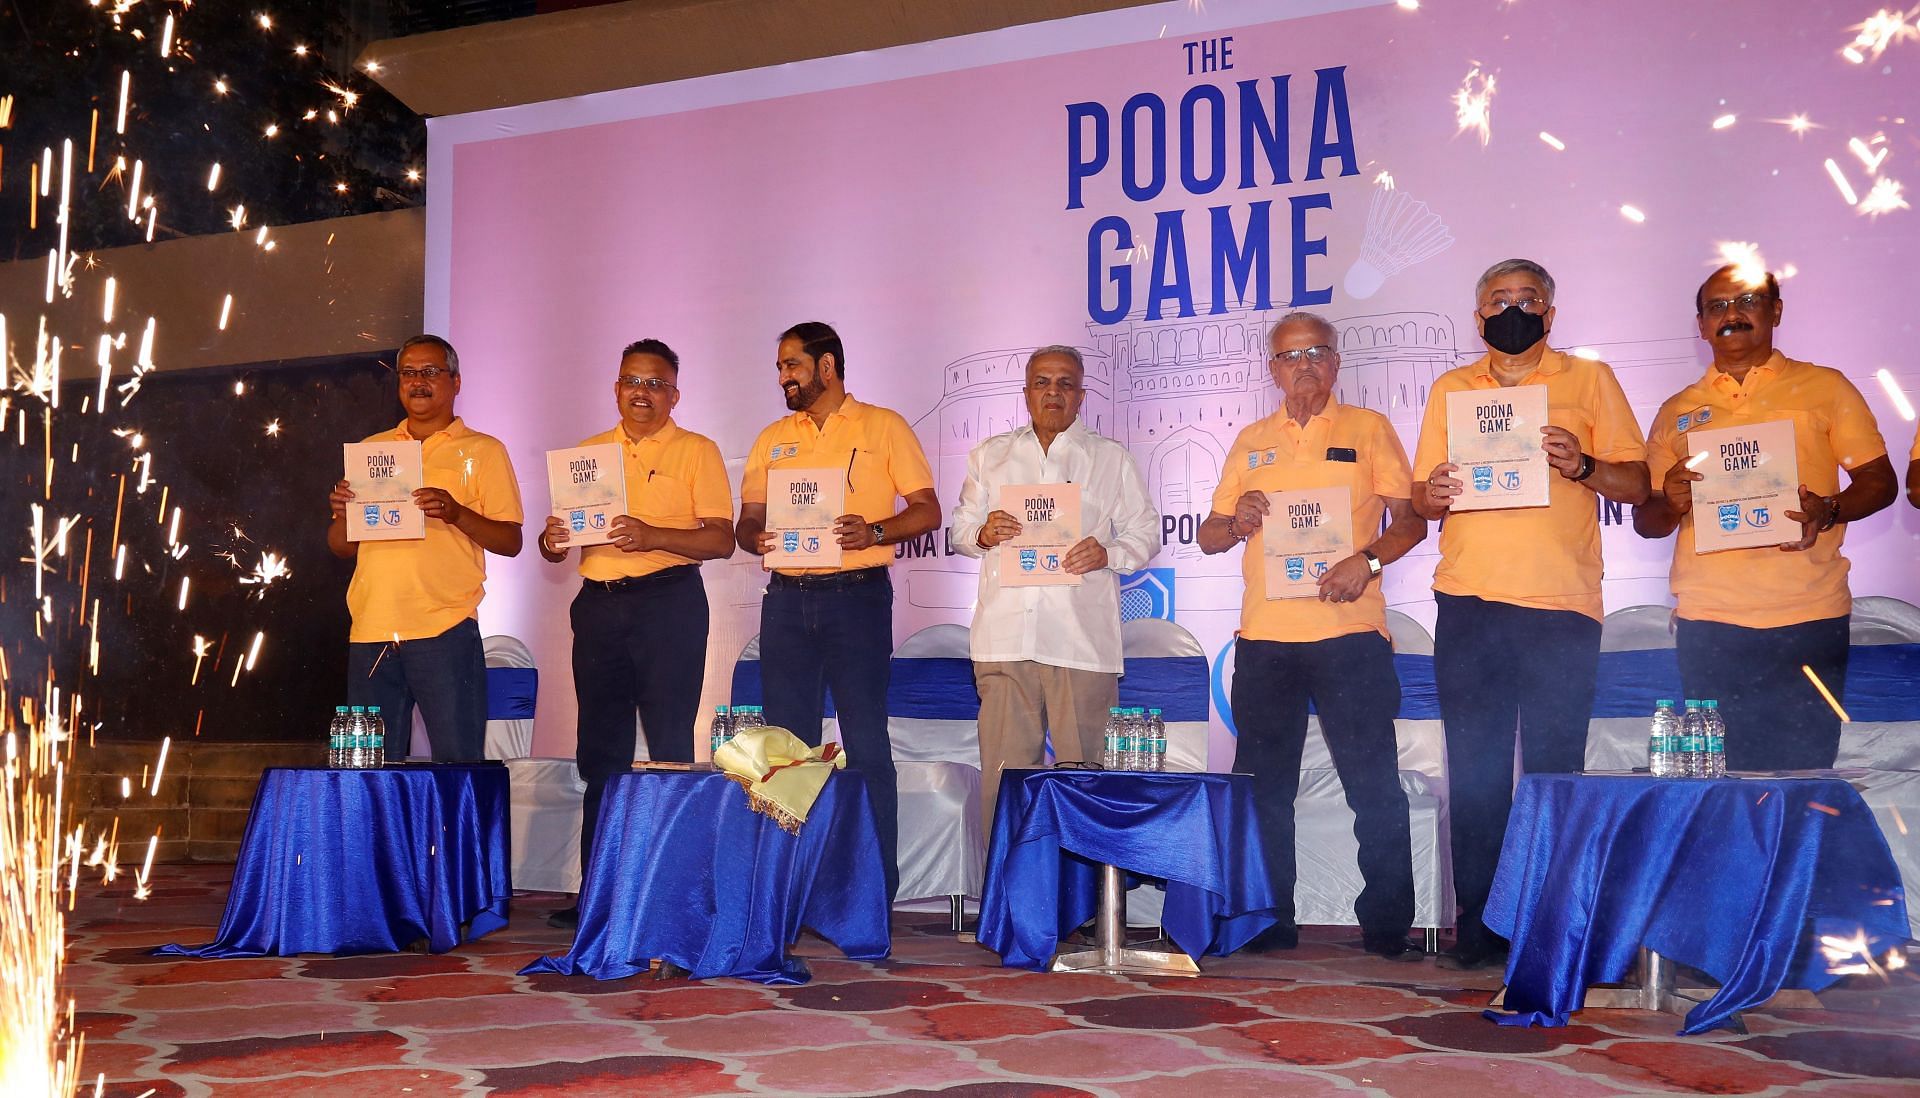 The PDMBA honored several players, officials, and staff members during the function. (Pic credit: PDMBA)